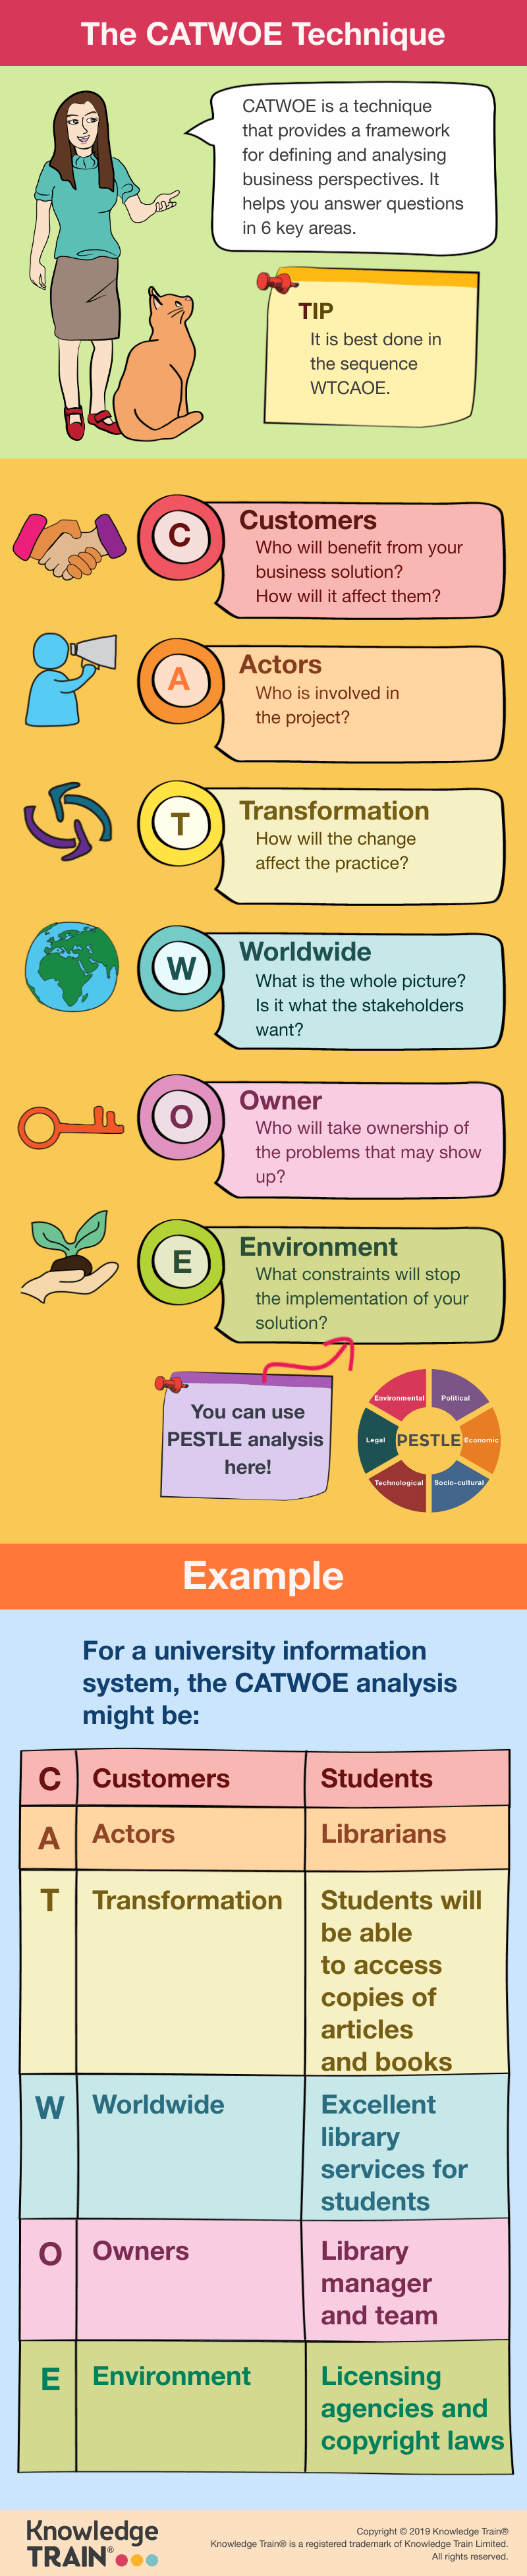 CATWOE business analysis technique infographic.